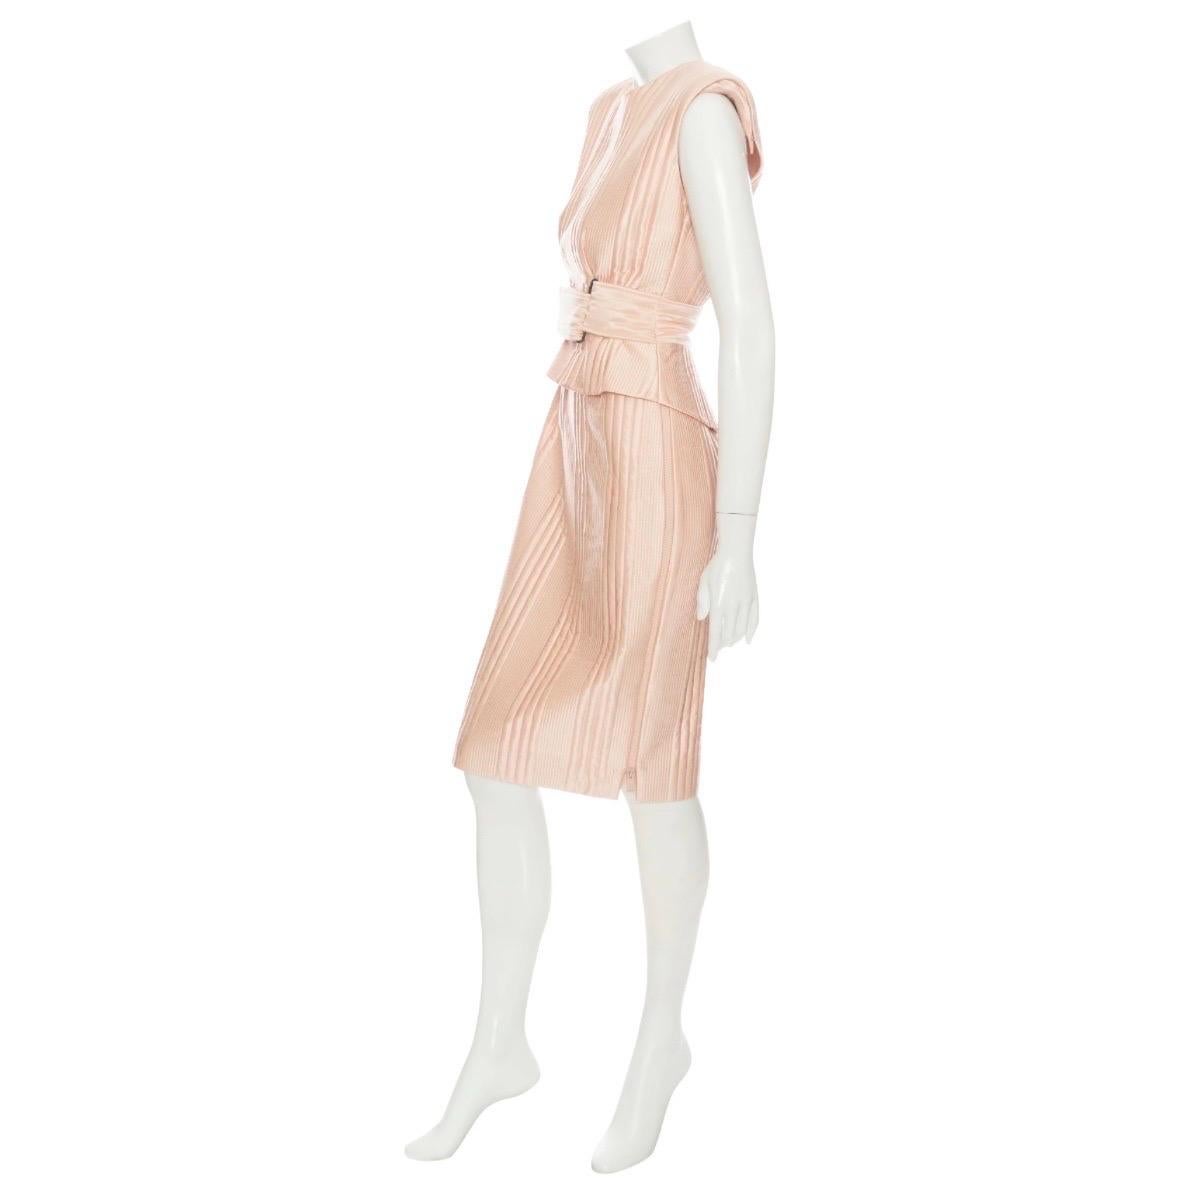 Fendi Pink Silk Quilted Peplum Dress

Light Pink/Blush
Quilted detailing
Sleeveless
High round neck
Padded shoulders
Peplum bodice
Pencil skirt
Attached wide waist belt
Back vent
Adjustable side zippers
Back zipper closure
Made in Italy
100%